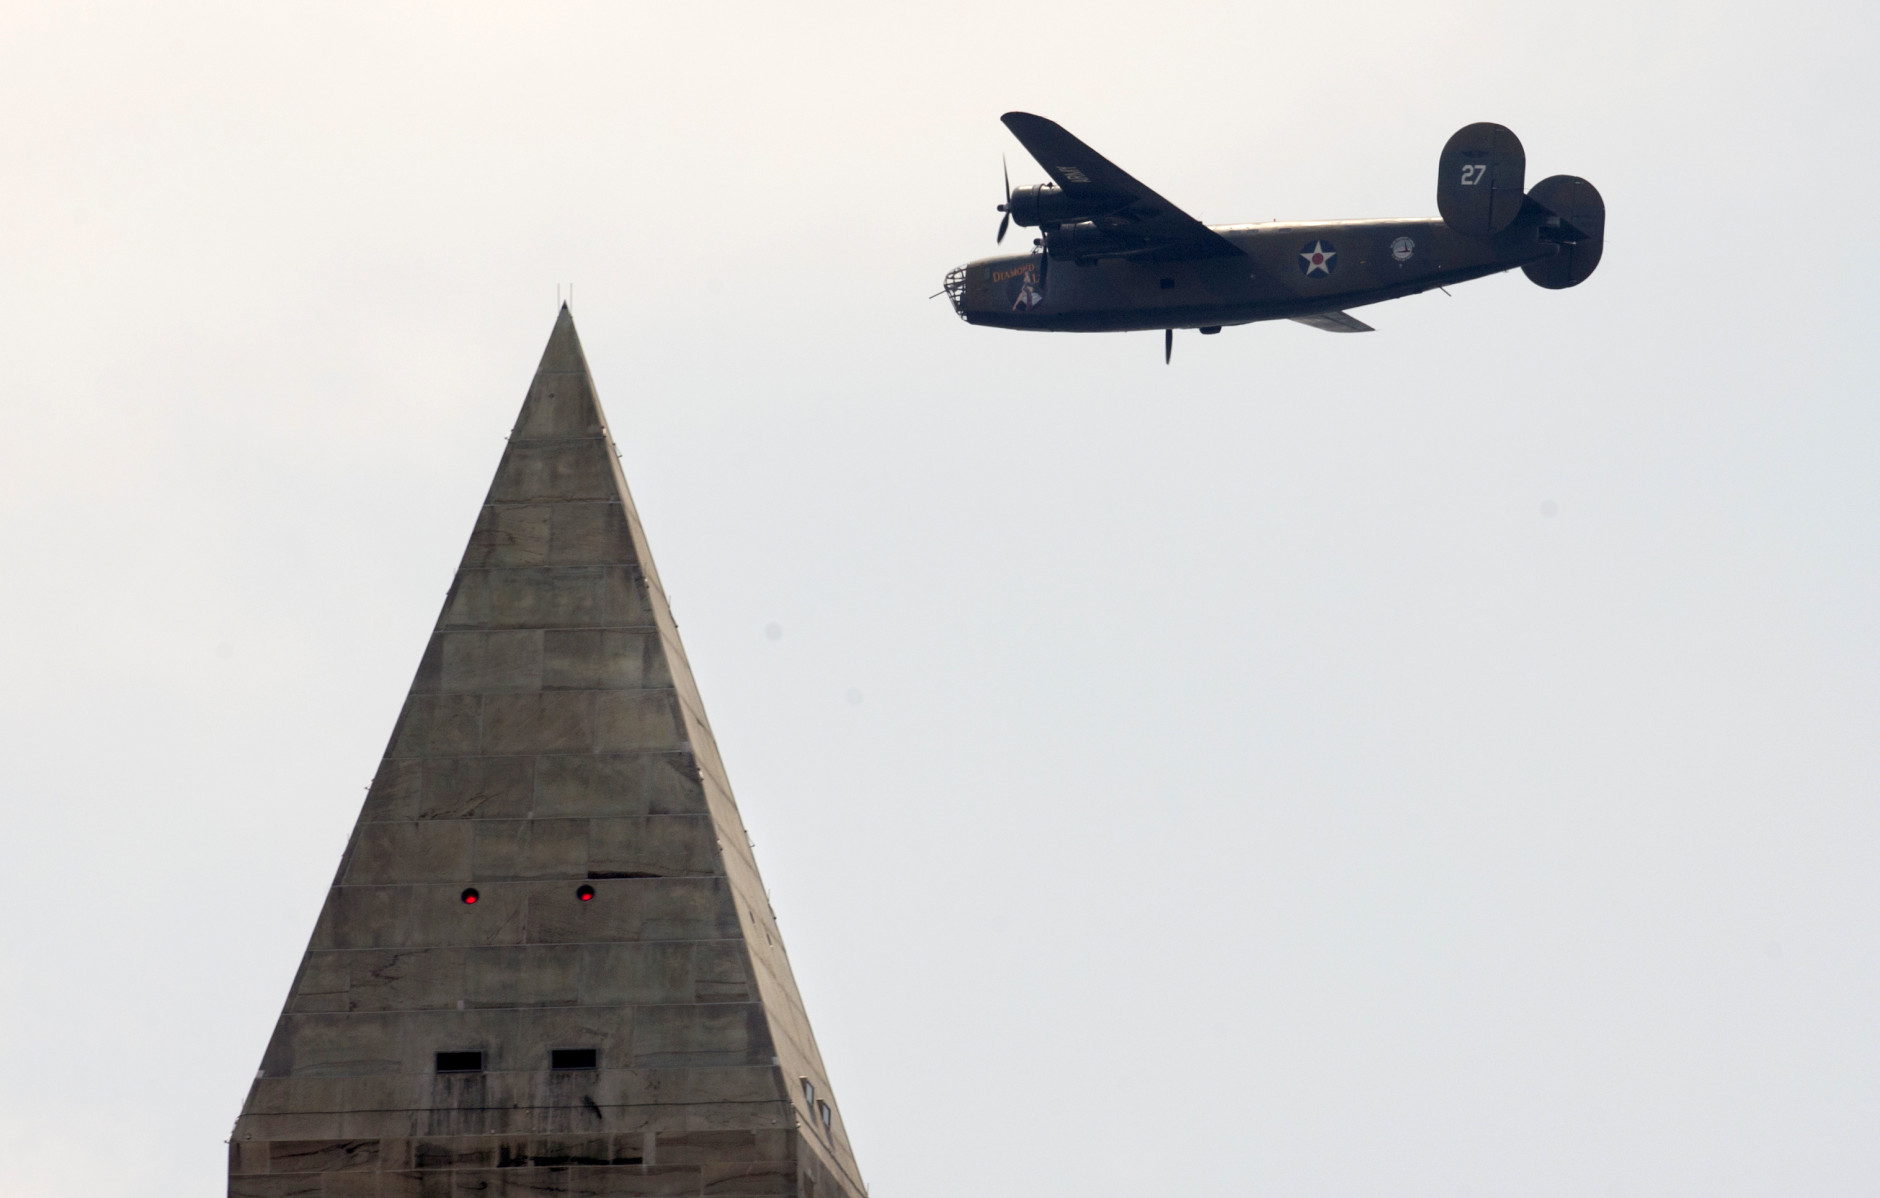 A B-24 Liberator vintage military aircraft from World War II, is seen from the South Lawn of the White House in Washington, Friday, May 8, 2015, as it flies past the Washington Monument to mark the 70th anniversary of Victory in Europe Day. (AP Photo/Carolyn Kaster)